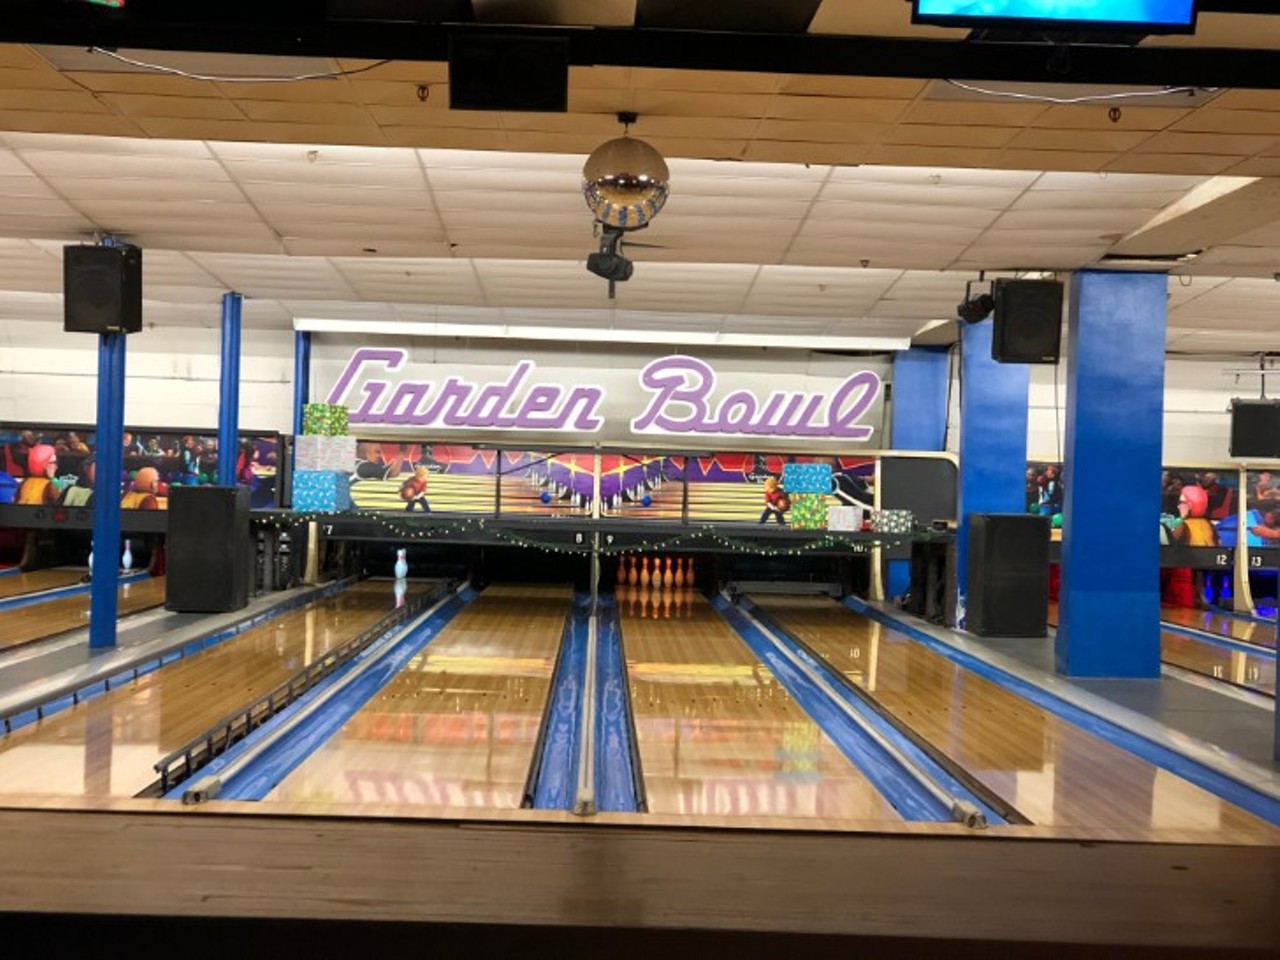 Knock down some pins at Garden Bowl
4120 Woodward Ave, Detroit
It's bills itself as "America's oldest active bowling center and Detroit's original home of Rock'n'Bowl" &#151; which features DJs spinning music while patrons bowl on over a dozen glowing blue lanes.
Photo by Devin Culham